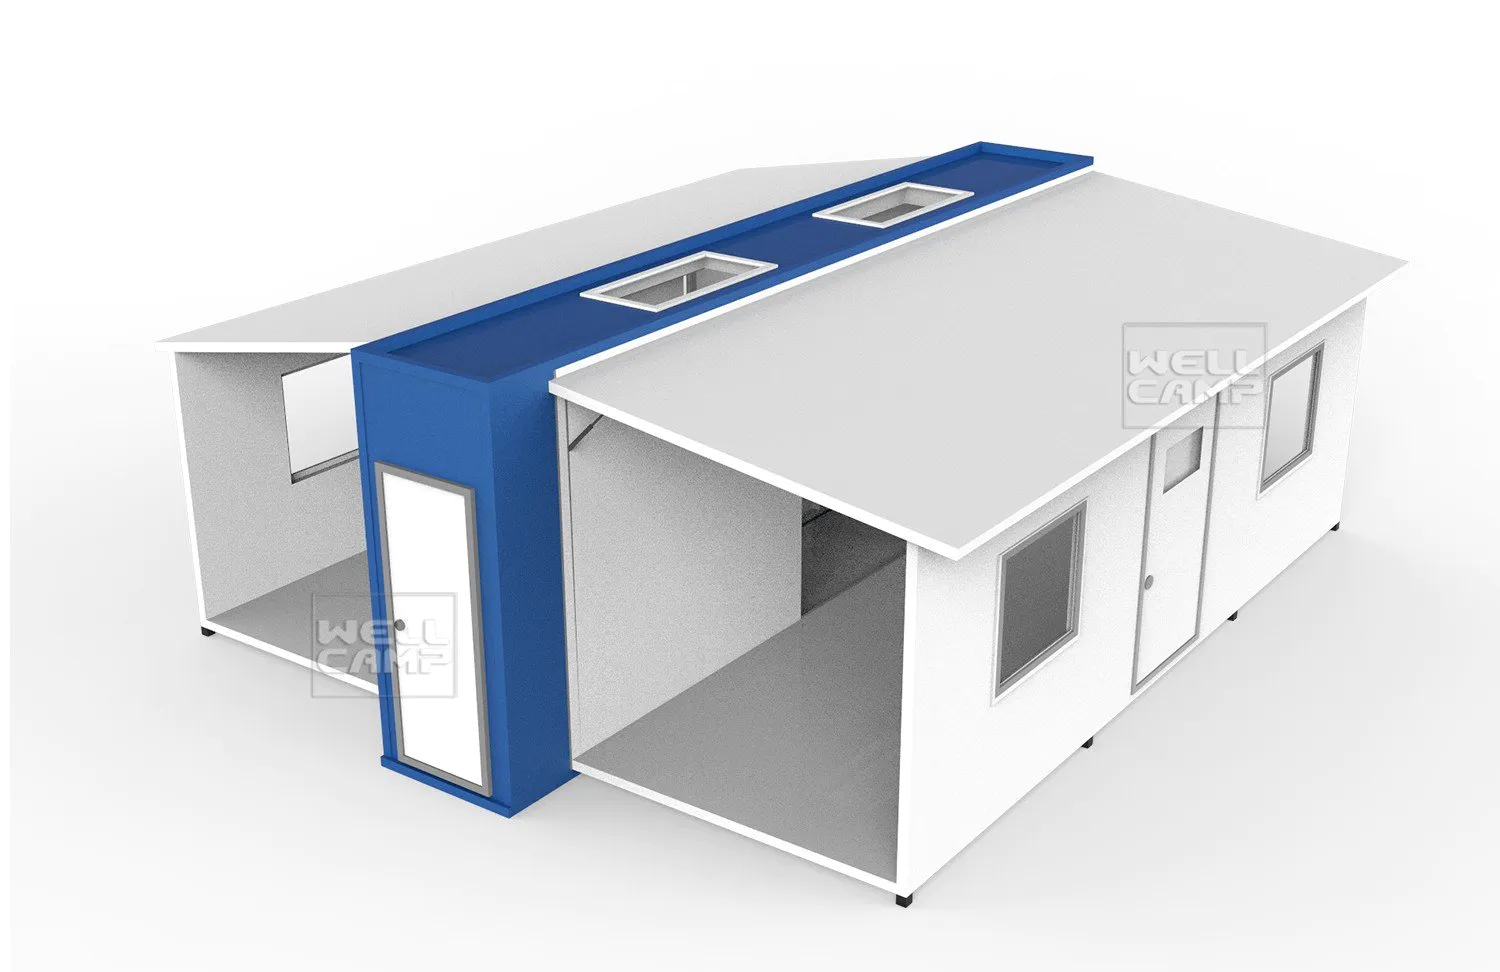 Hot expandable shelter WELLCAMP, WELLCAMP prefab house, WELLCAMP container house Brand